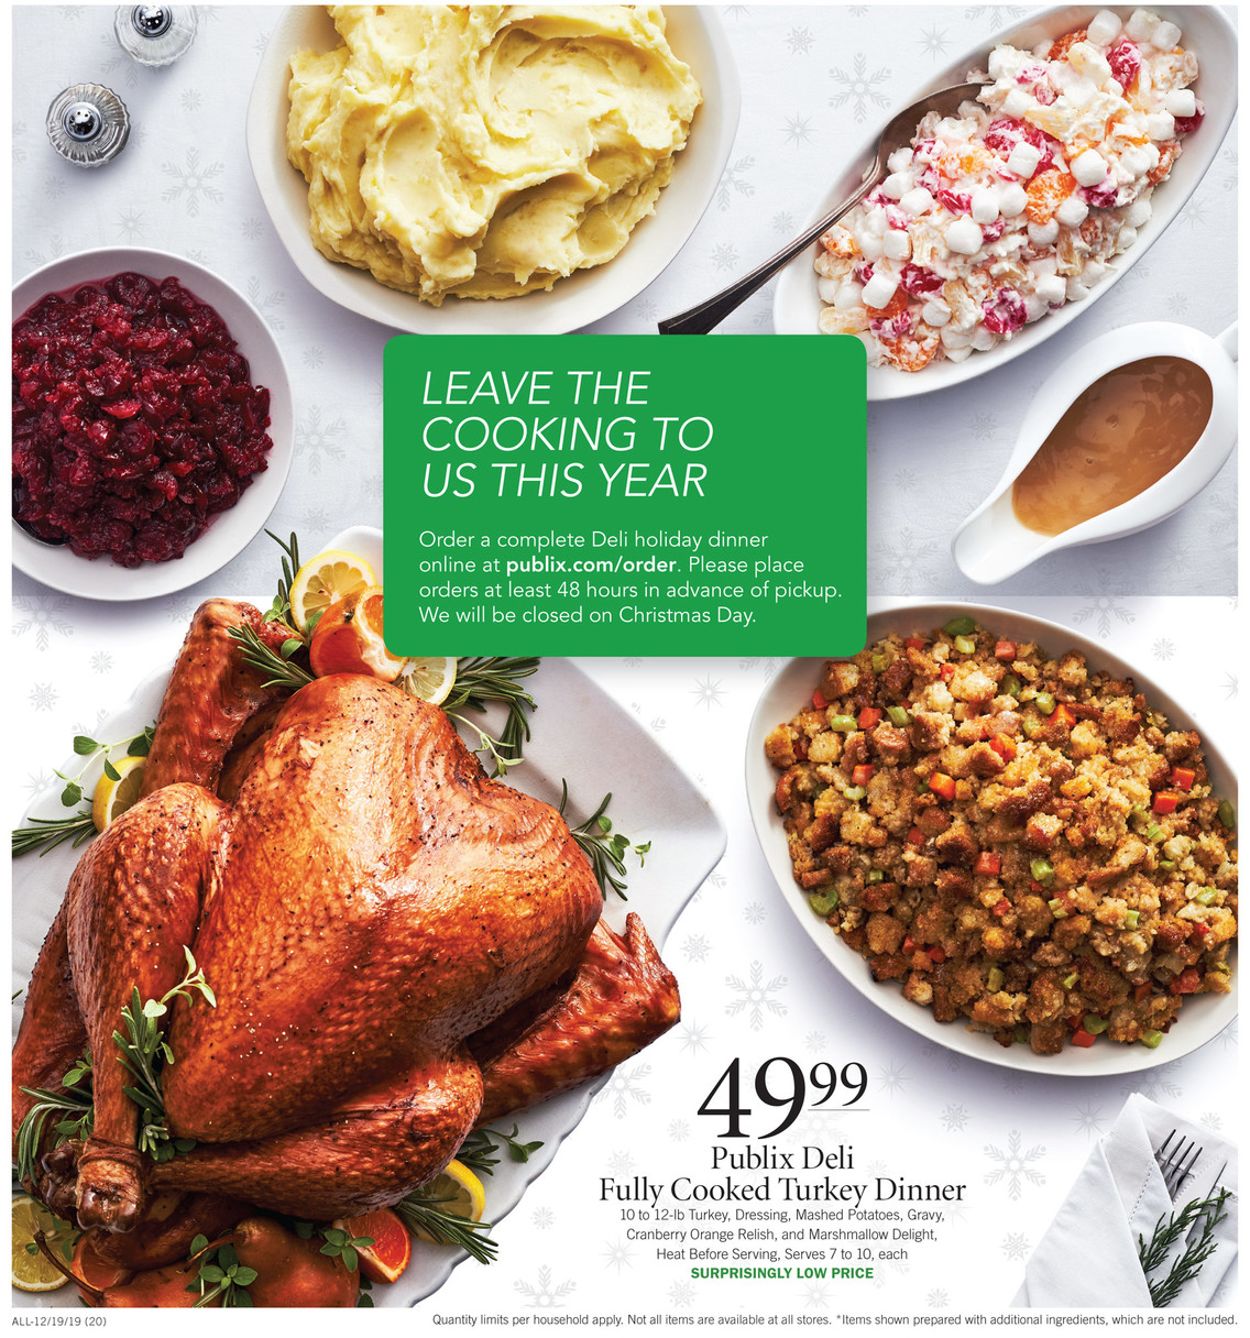 Publix Christmas Meal : Publix Christmas Meal / Thanksgiving With Publix - No ... : Shop online for groceries and swing by when it's best for you.